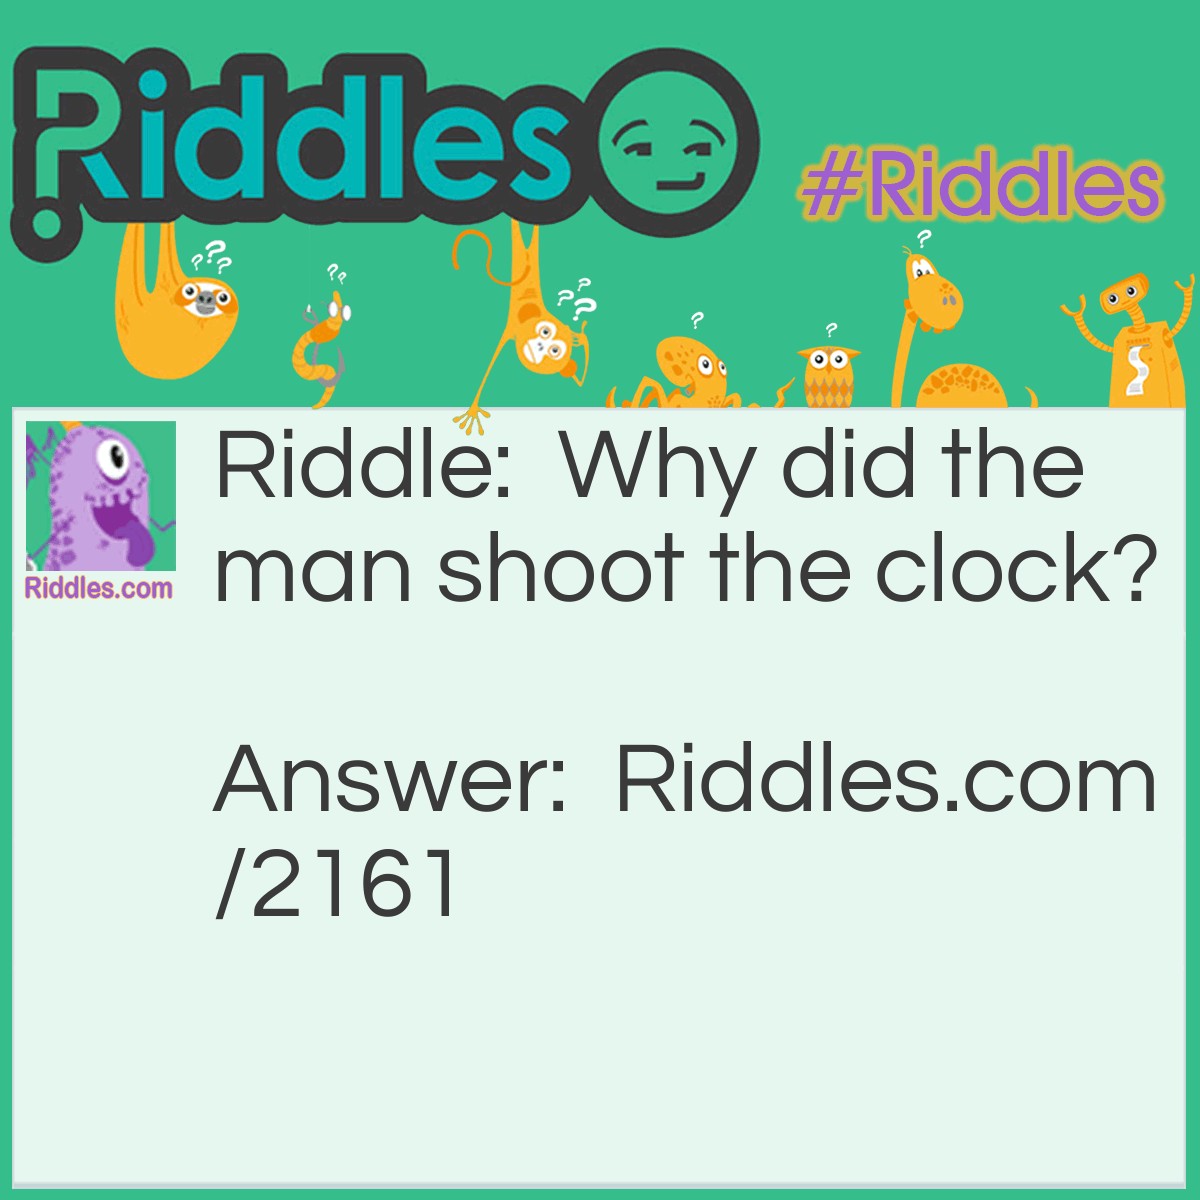 Riddle: Why did the man shoot the clock? Answer: He was killing time.